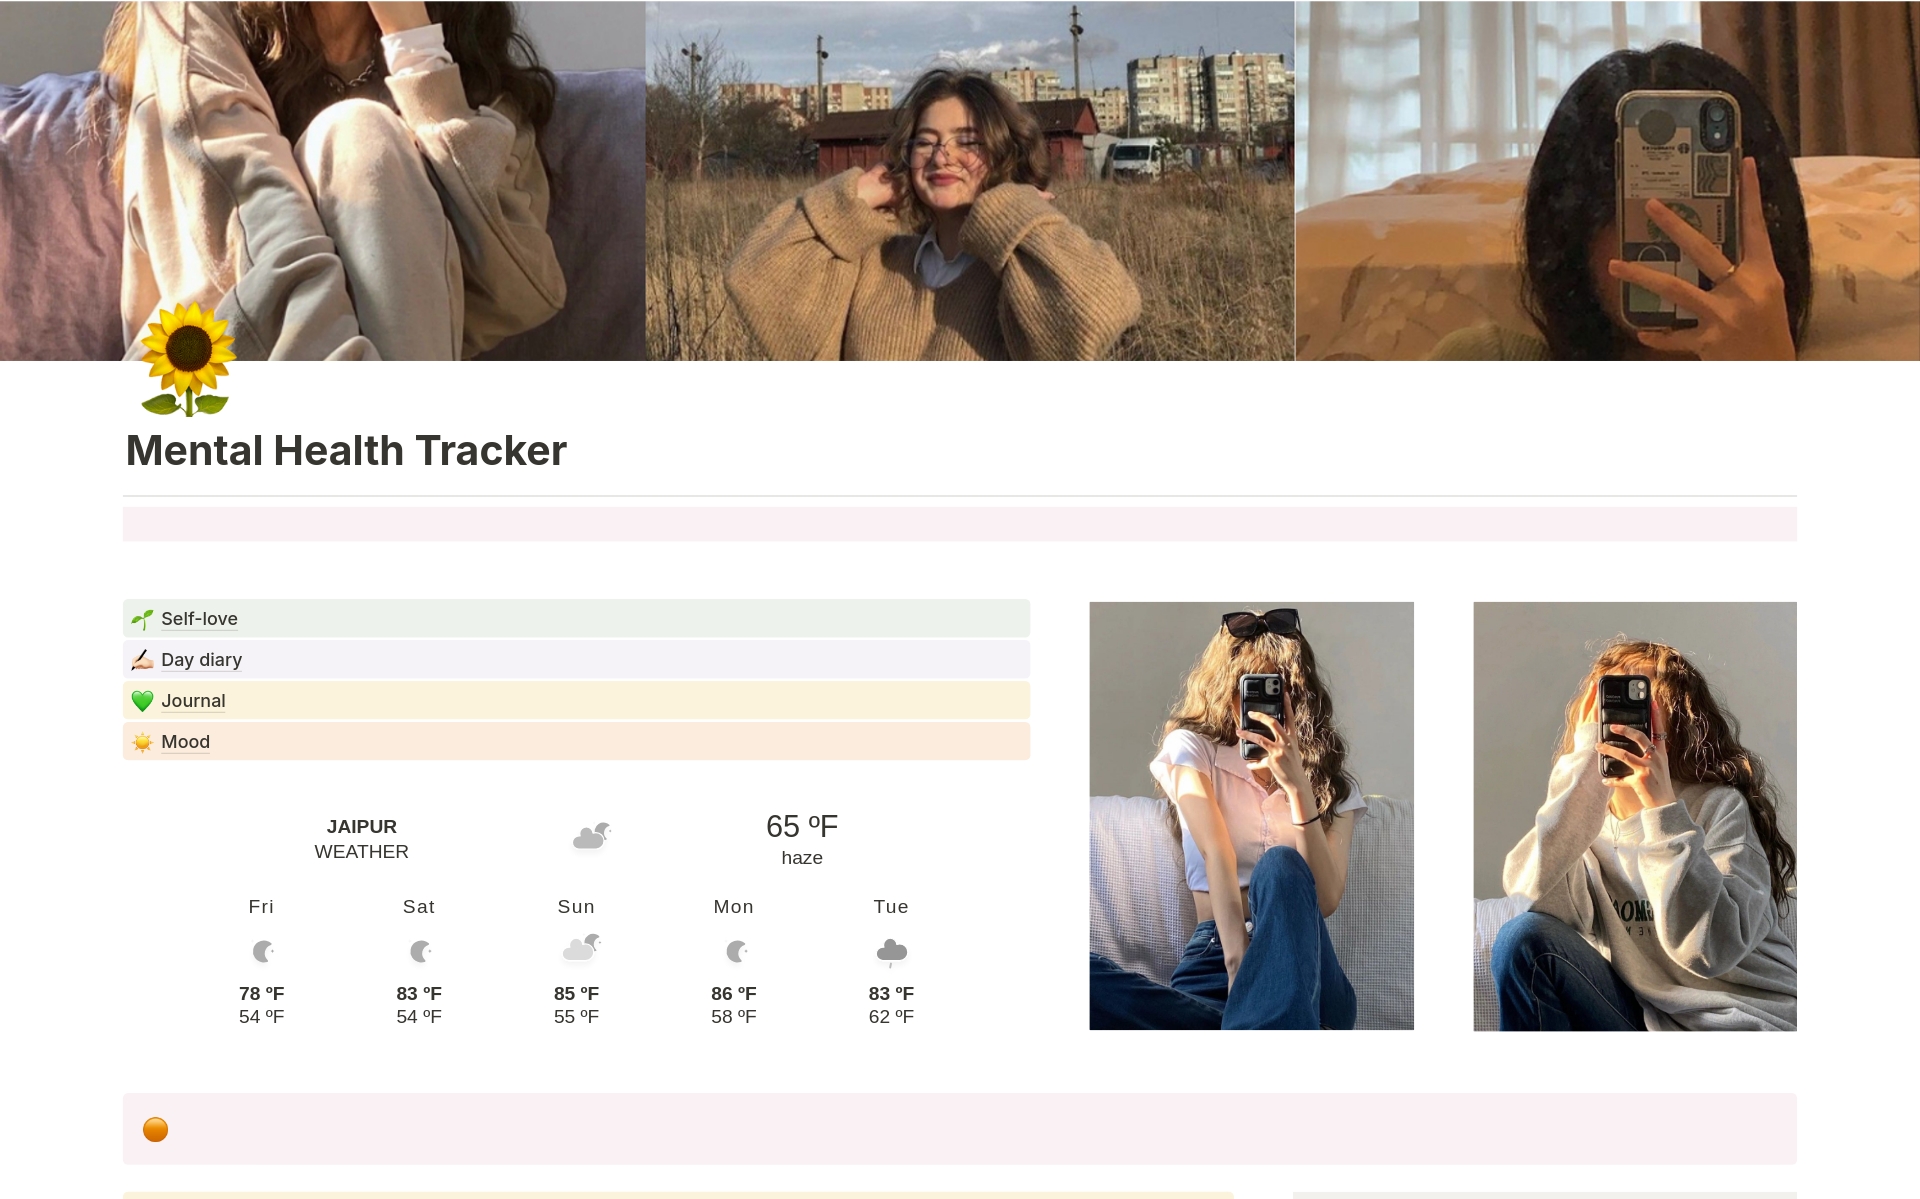 Notion mental health tracker is a template that allows you to monitor and manage your mental well-being over time. 

